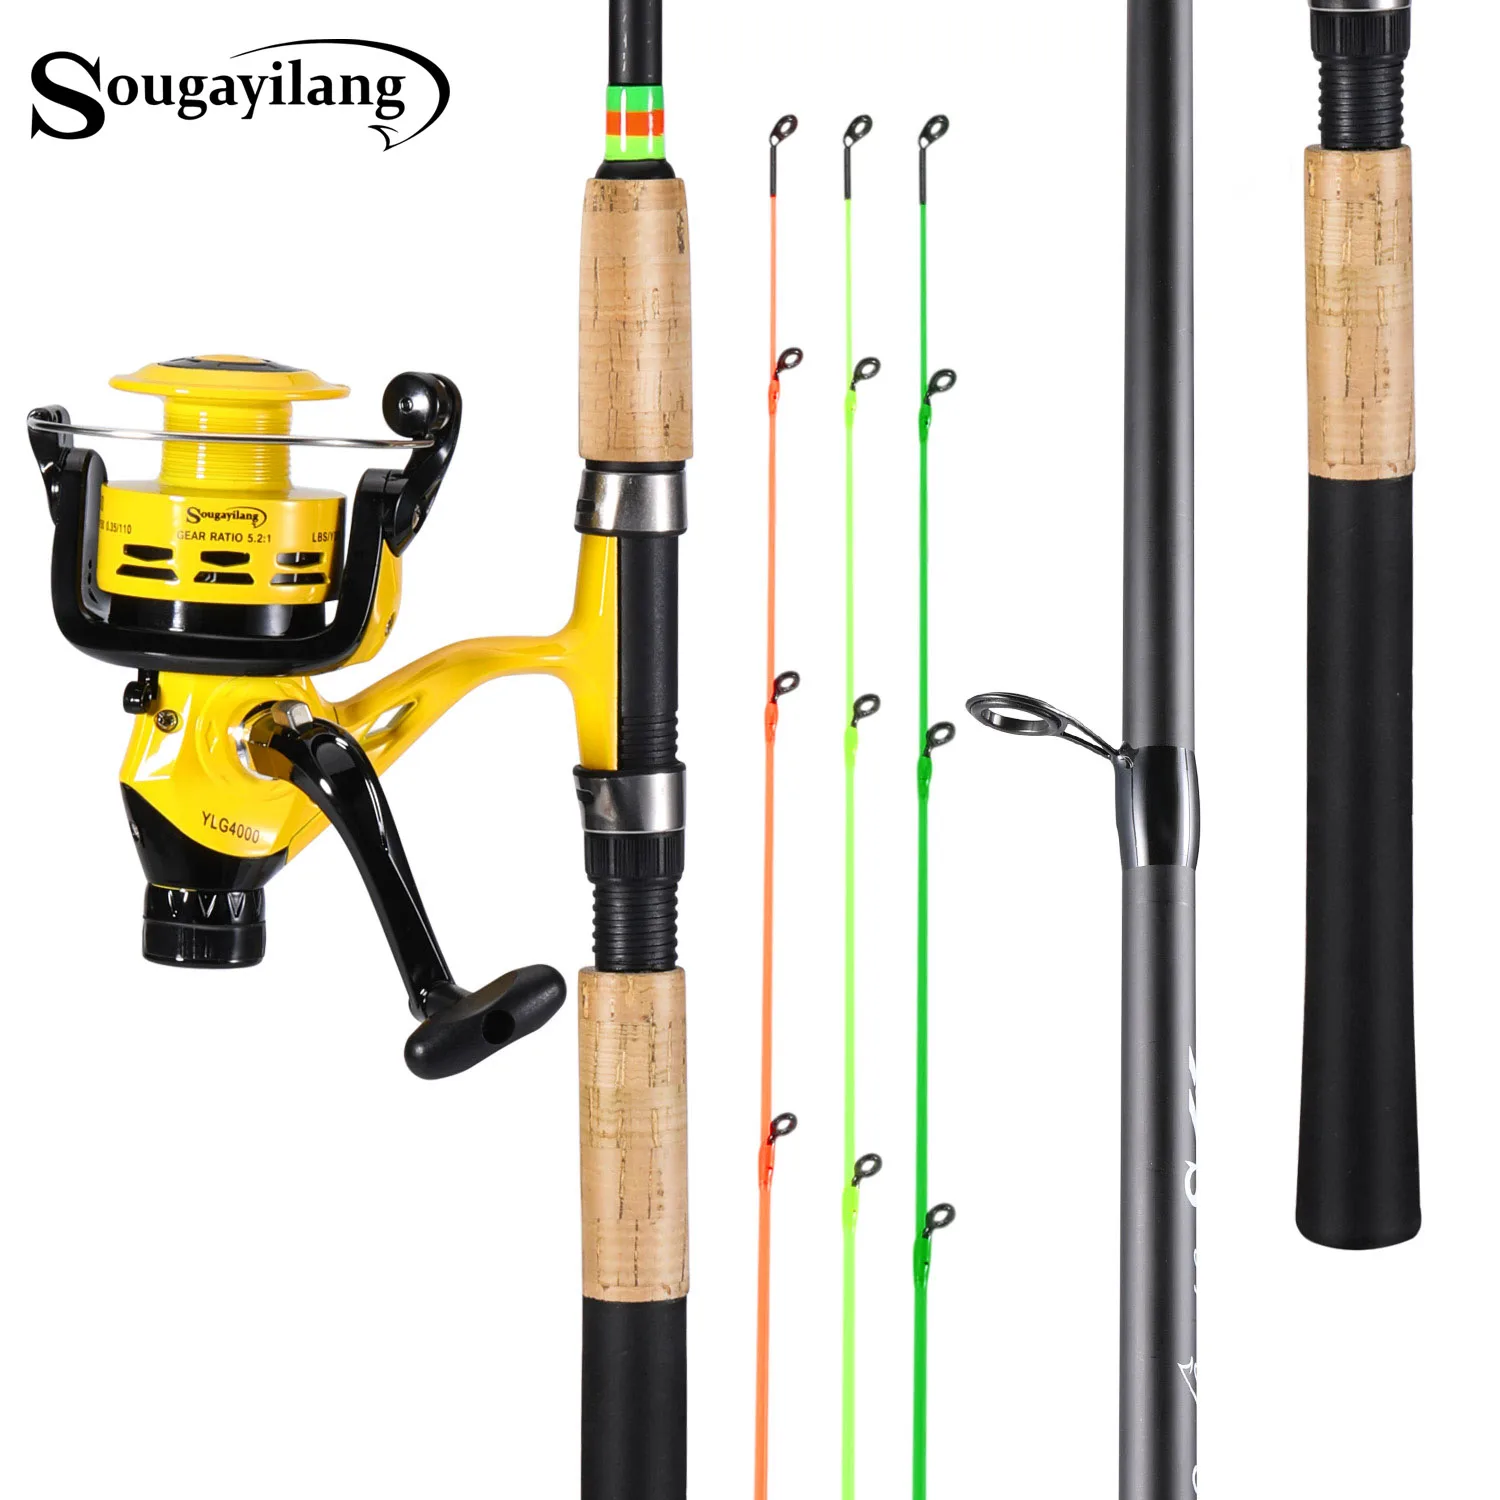 Sougayilang 3M Feeder Fishing Rod and Reel Combo 6 Section 24T Carbon Fiber  Spinning Travel Rod and 3 Model Spinning Reel Pesca - AliExpress